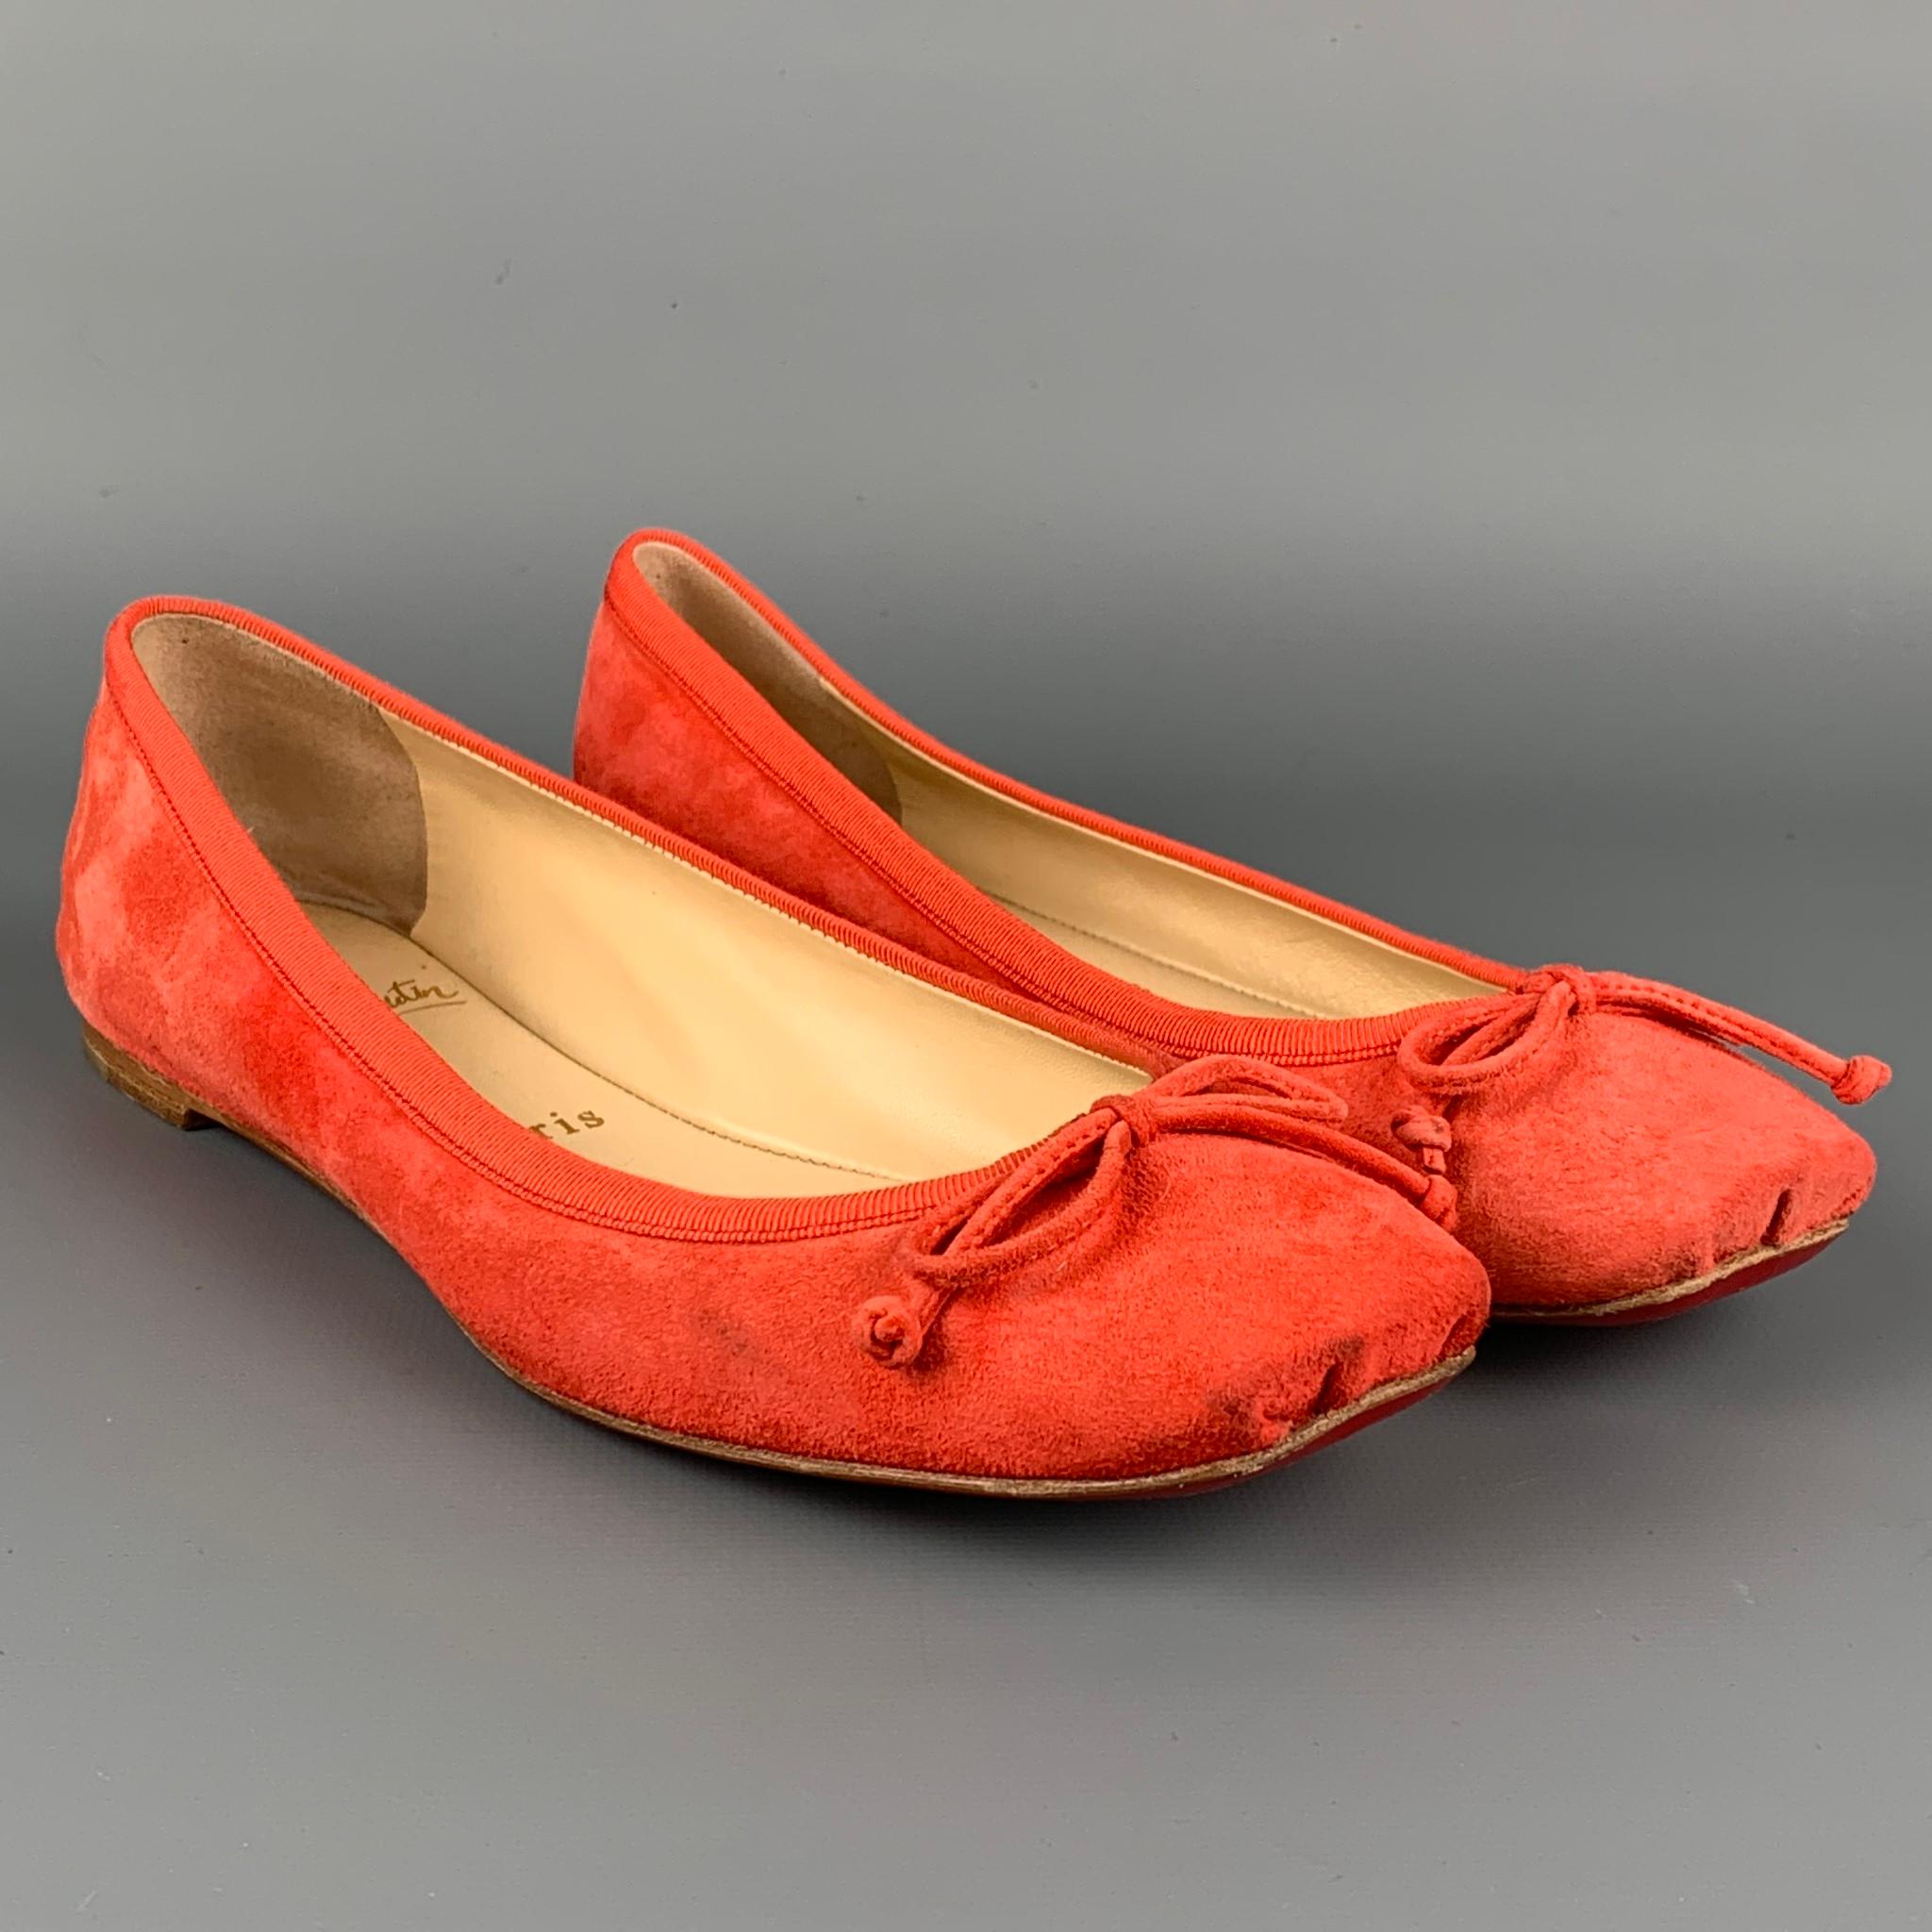 CHRISTIAN LOUBOUTIN flats comes in a coral suede featuring a ballet style, front bow details, and signature red sole. Made in Italy. 

Good Pre-Owned Condition.
Marked: 36.5
Original Retail price: $595.00

Outsole: 9.5 in. x 3 in. 